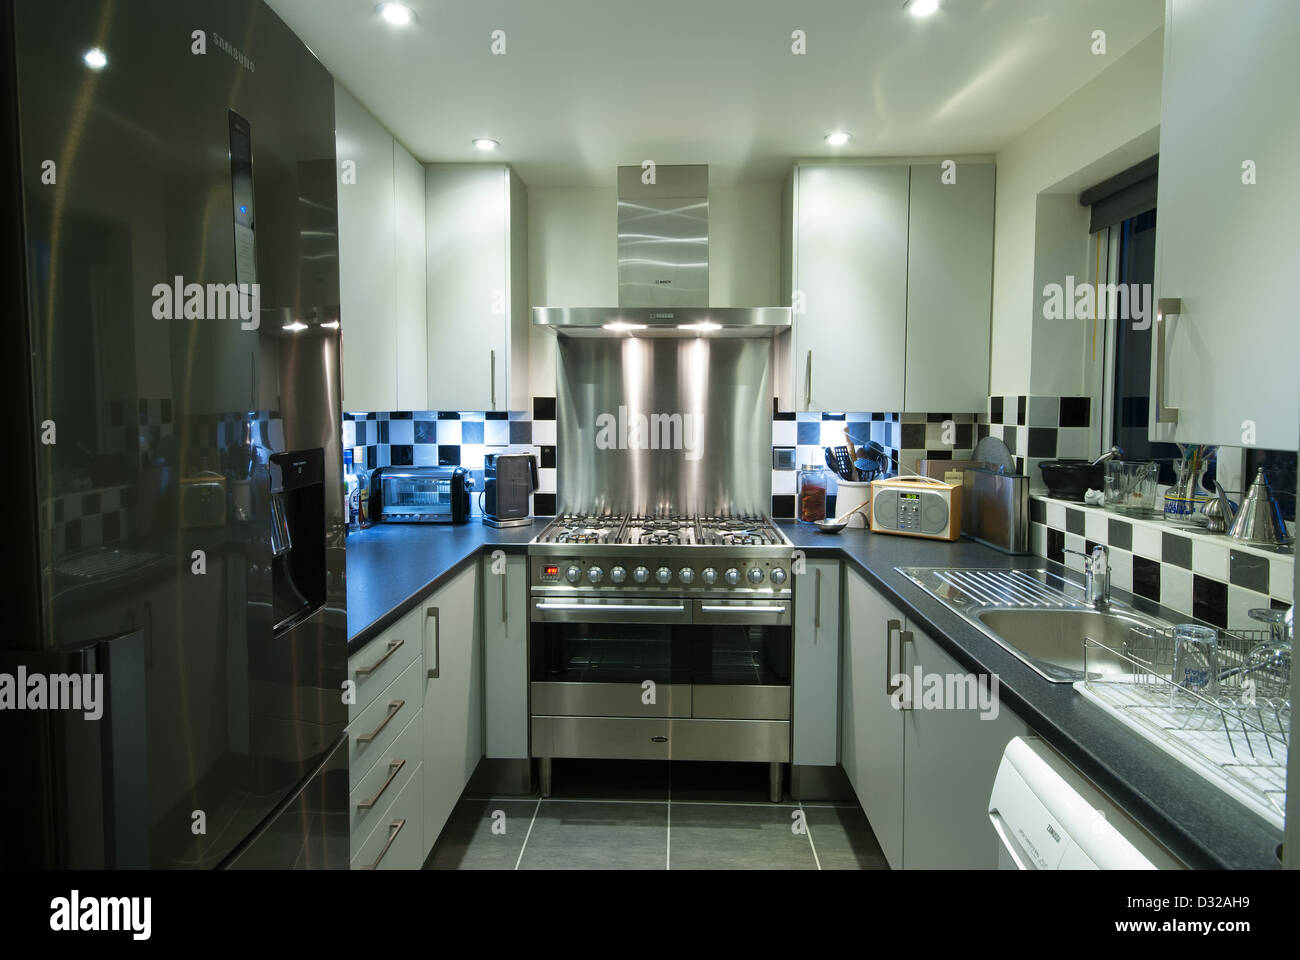 A small, modern domestic kitchen with a stainless steel range cooker. UK, 2013. Stock Photo